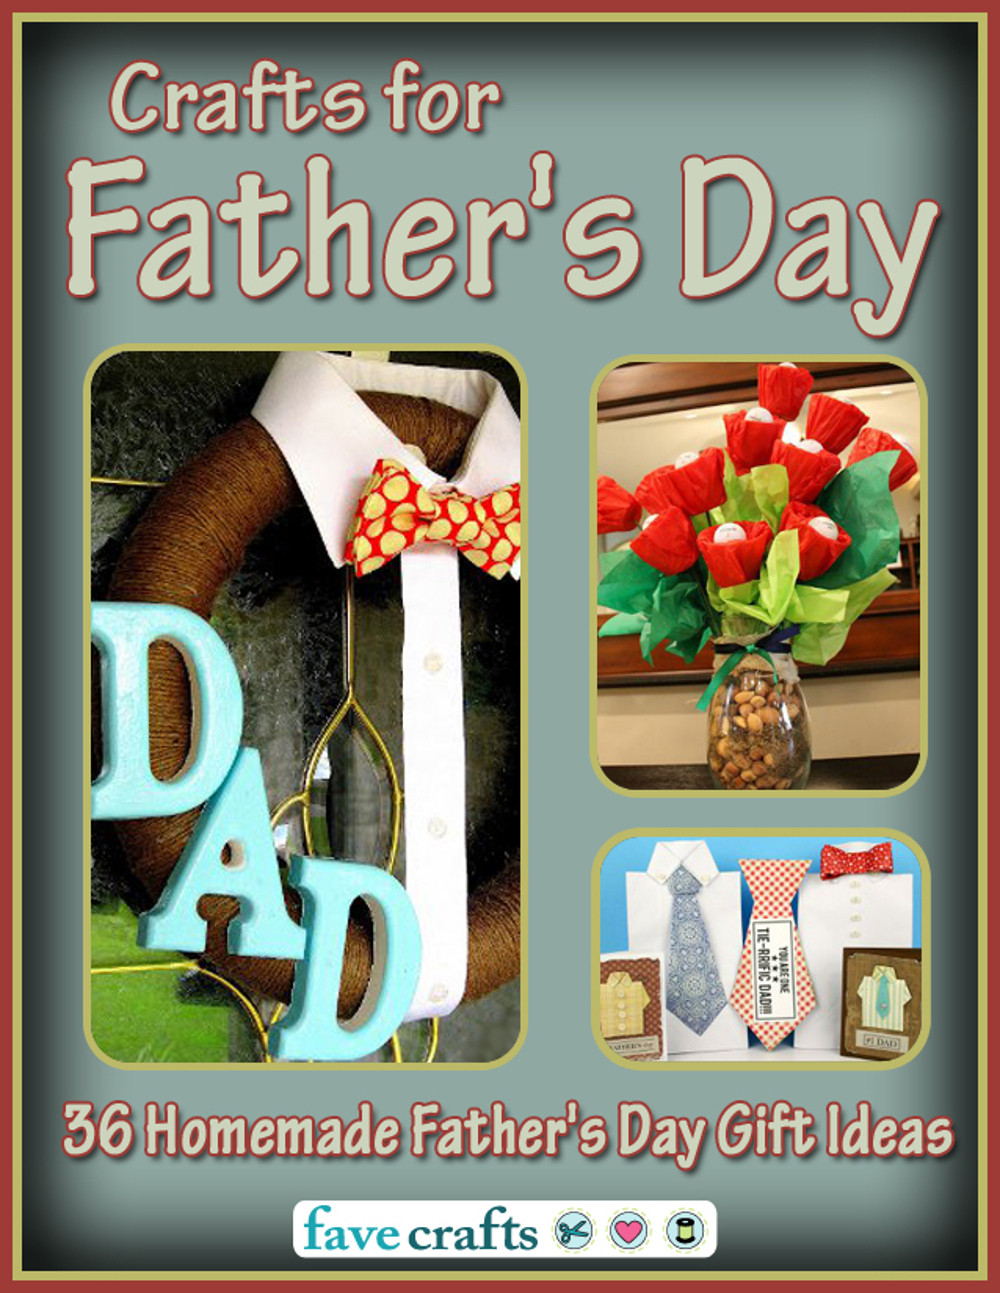 On Line Fathers Day Gifts
 Crafts for Father s Day 36 Homemade Father s Day Gift